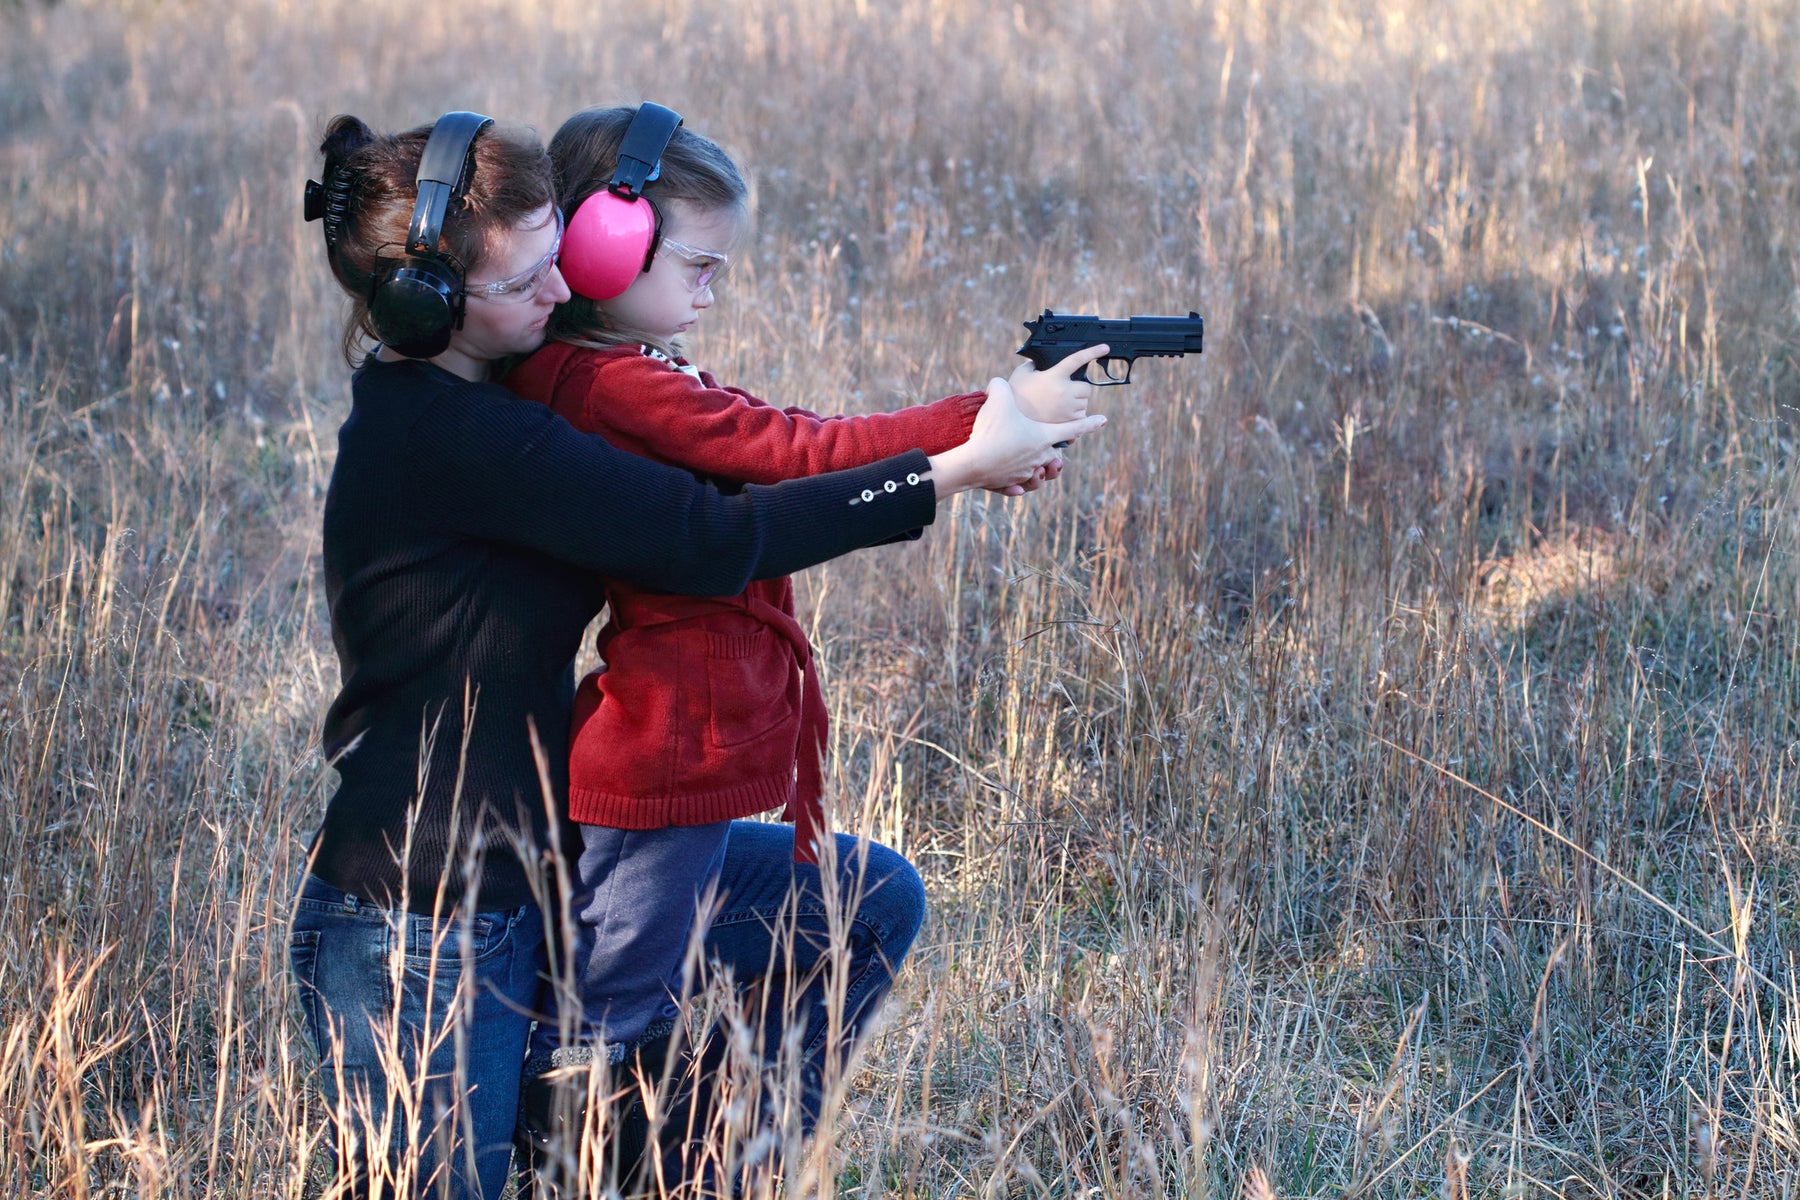 Teaching A Non-Shooter About Guns - What Is the Right Way To Do It?